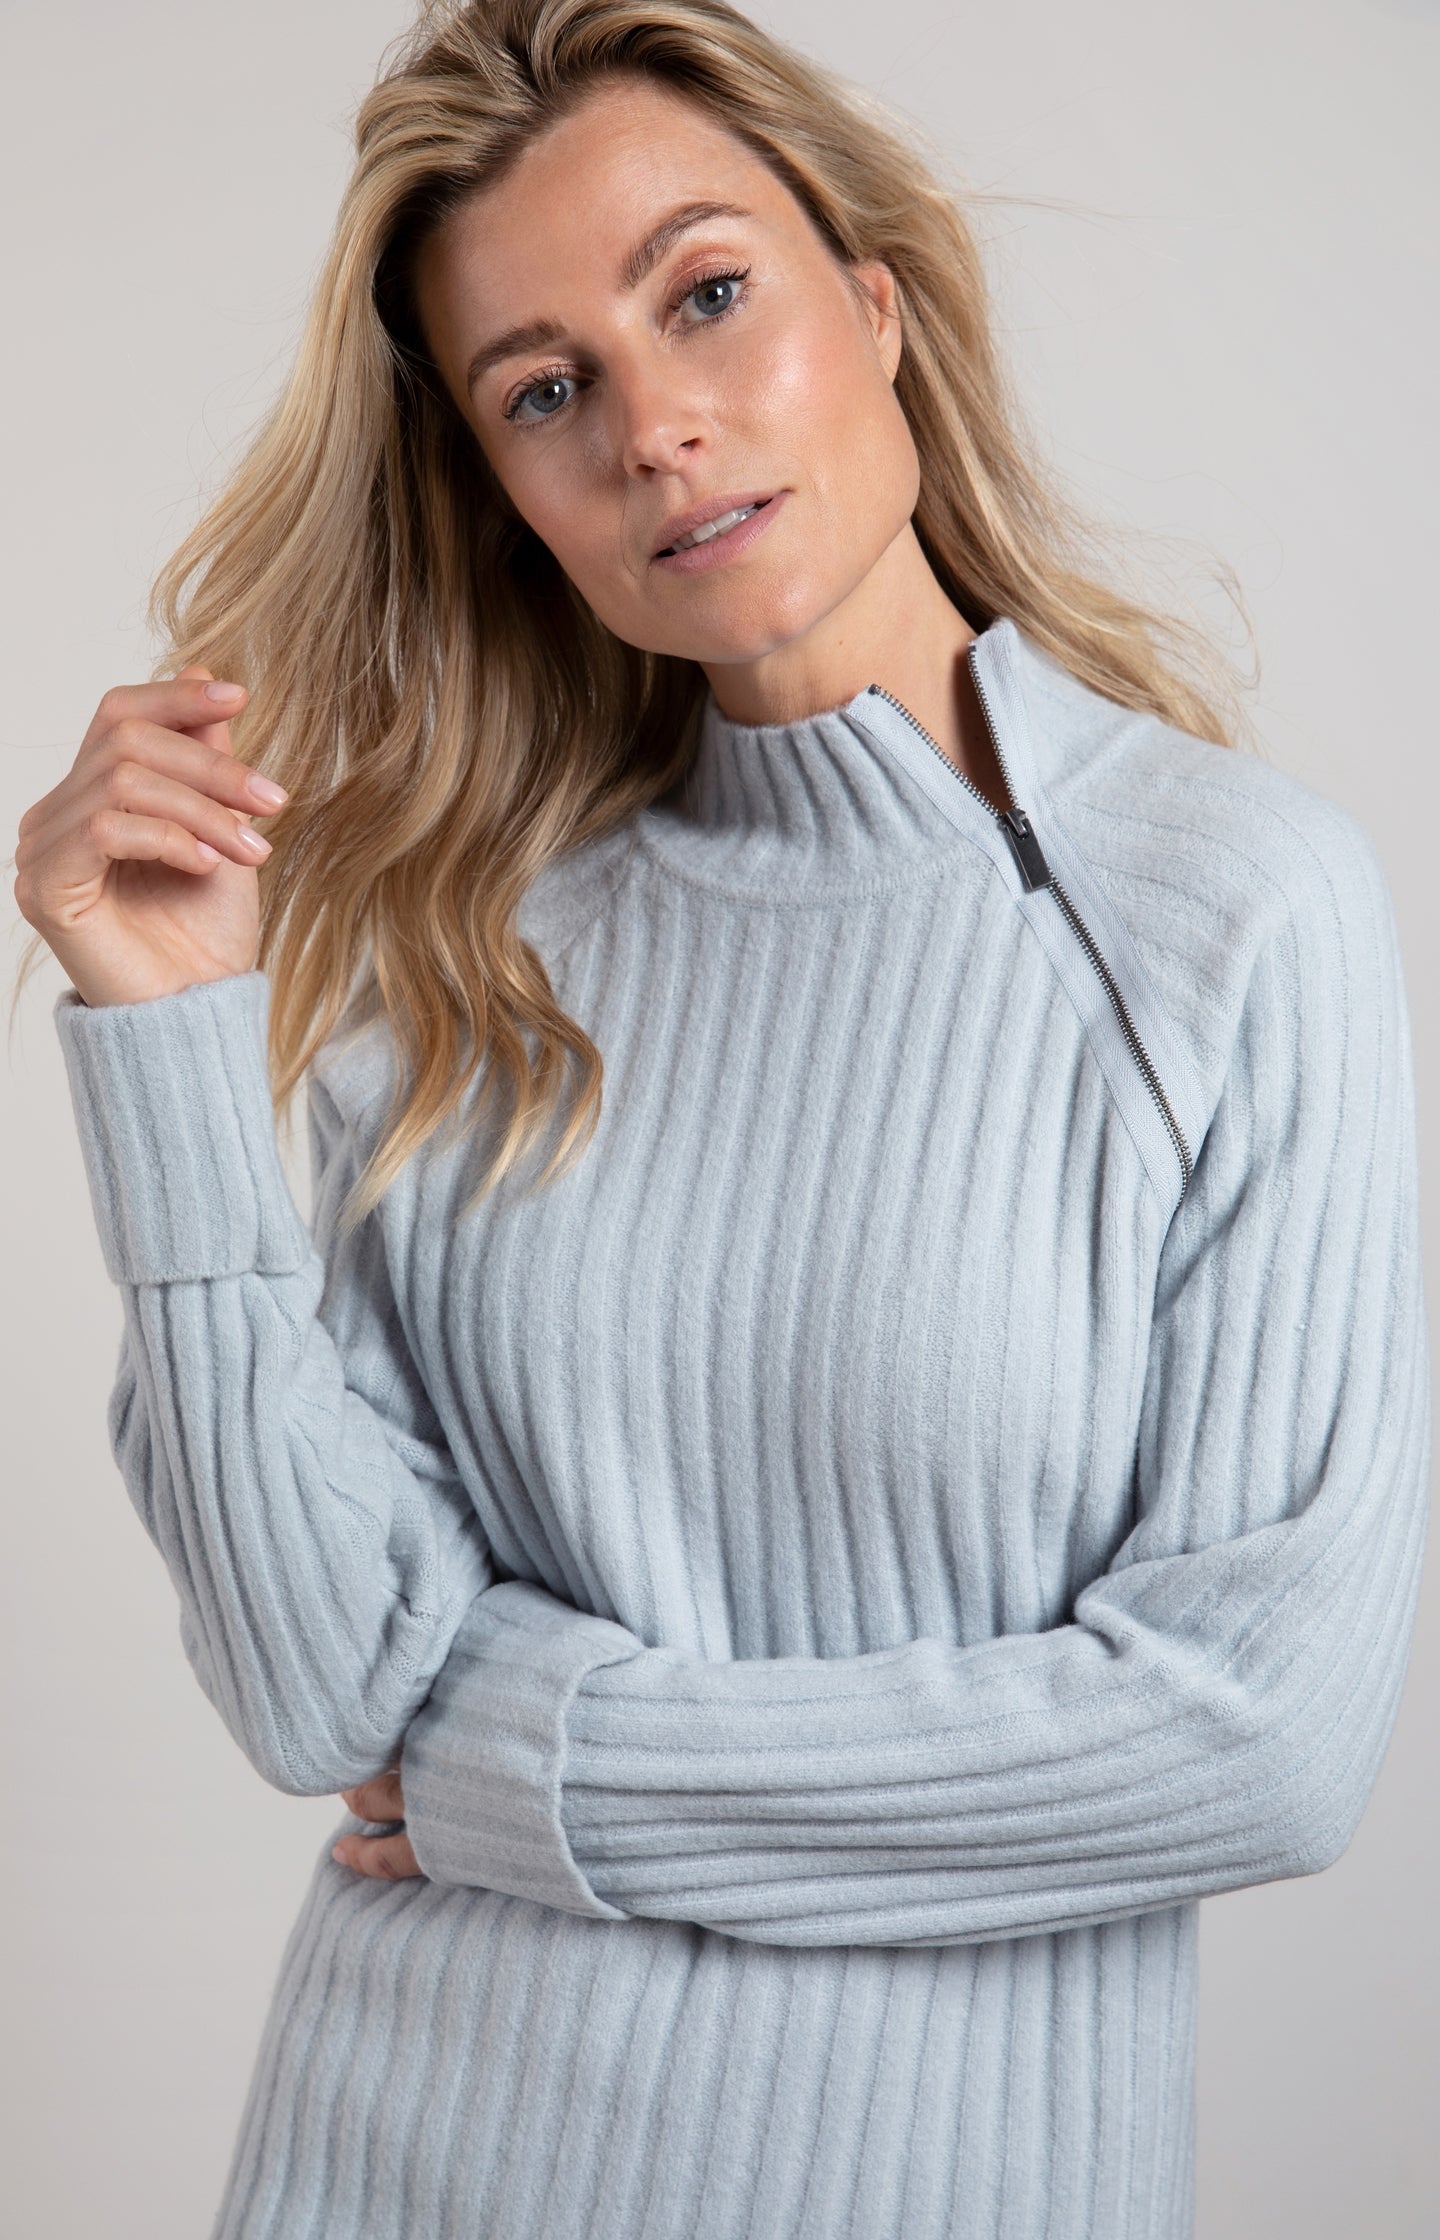 Tunic sweater with high neck, long sleeves and zipper